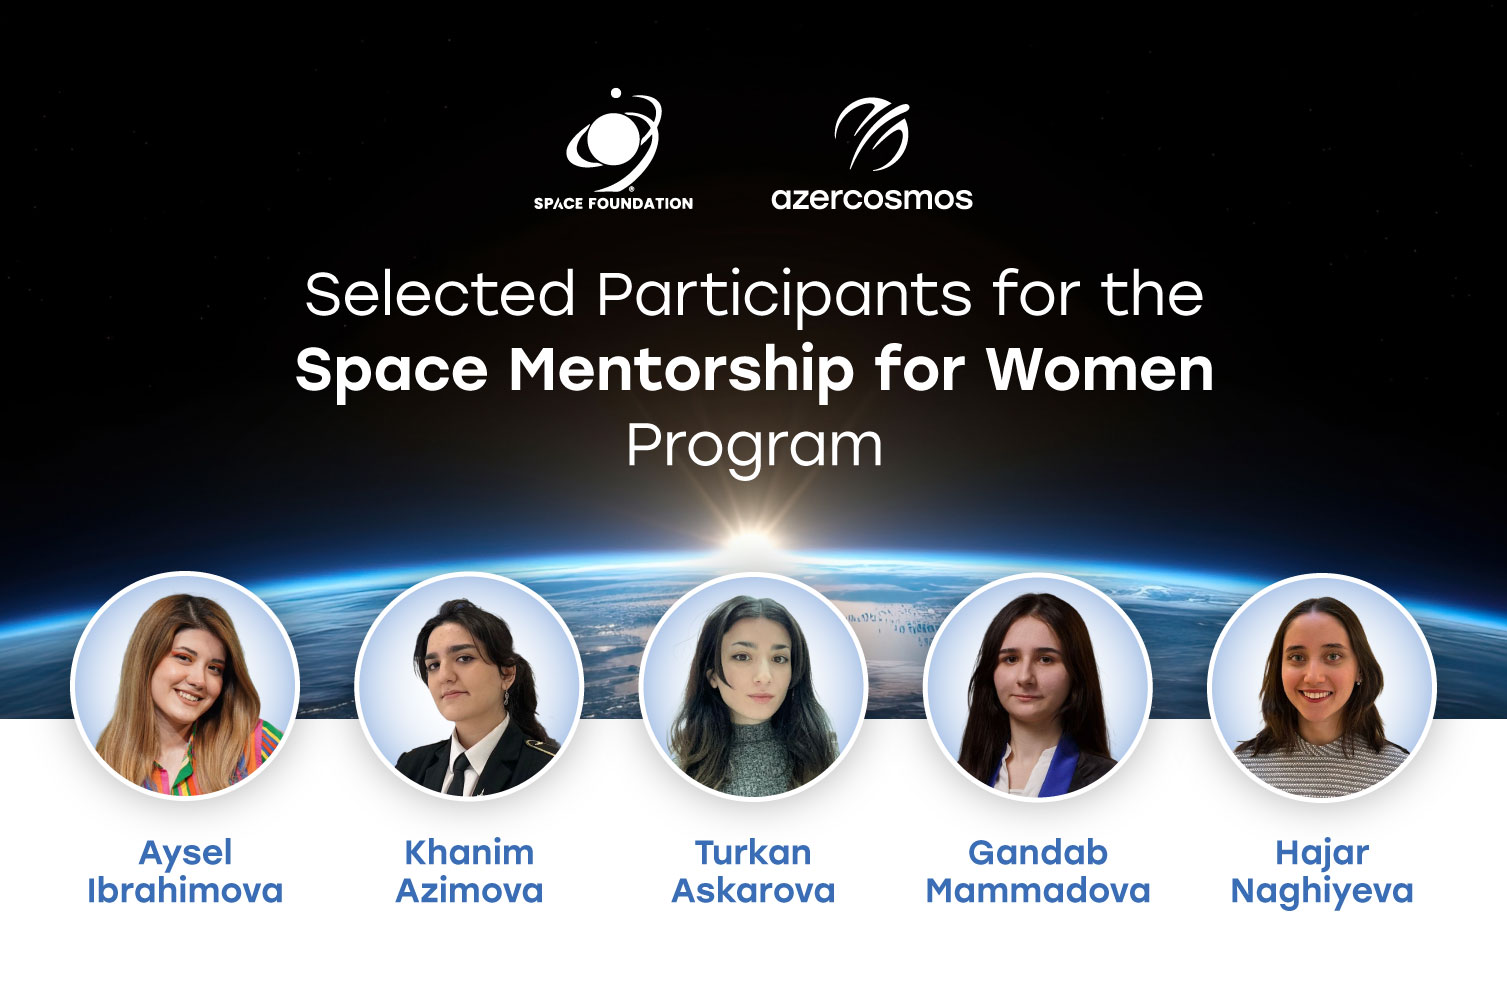 The selection stage of the program “Space Mentorship for Women” has concluded